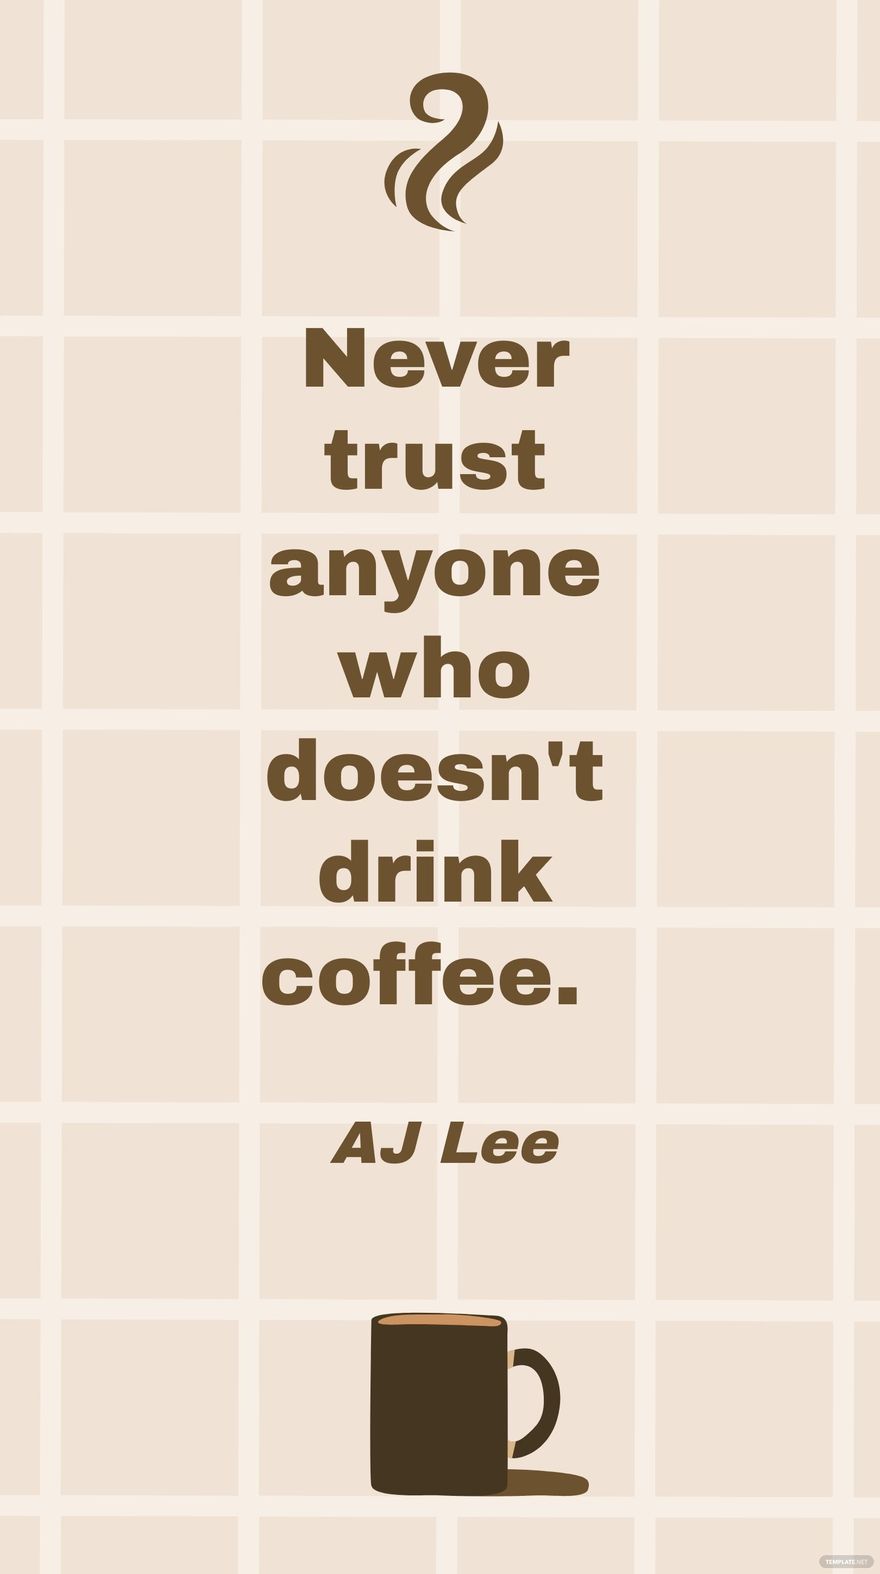 Free AJ Lee - Never trust anyone who doesn't drink coffee. in JPG